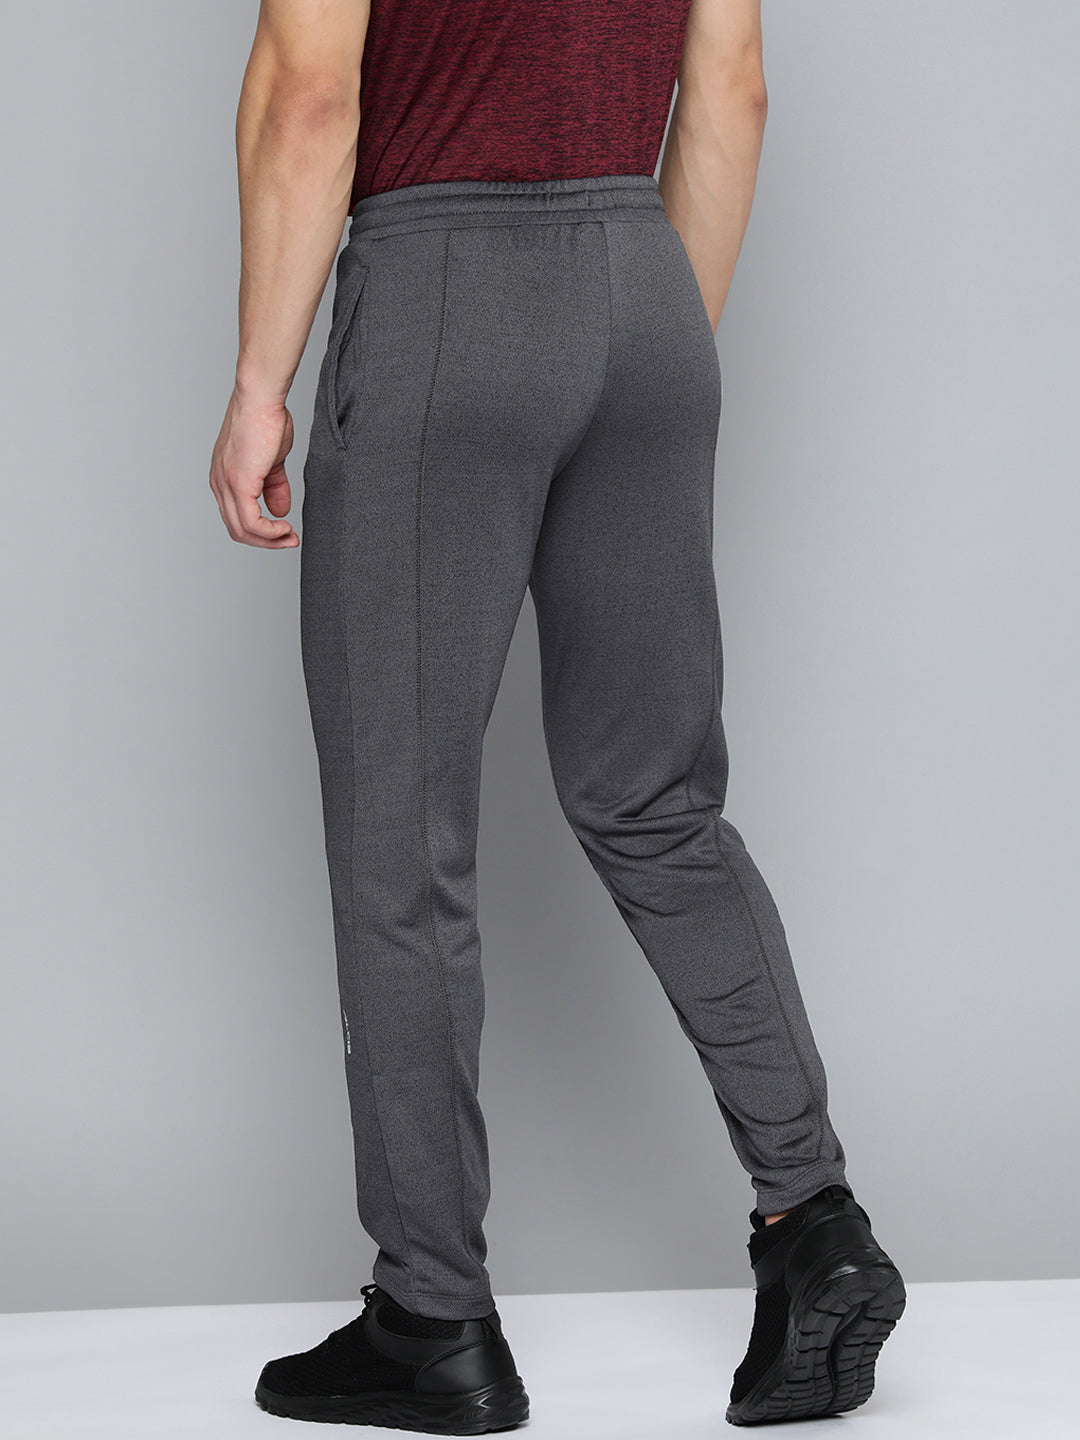 charcoal grey suit trousers